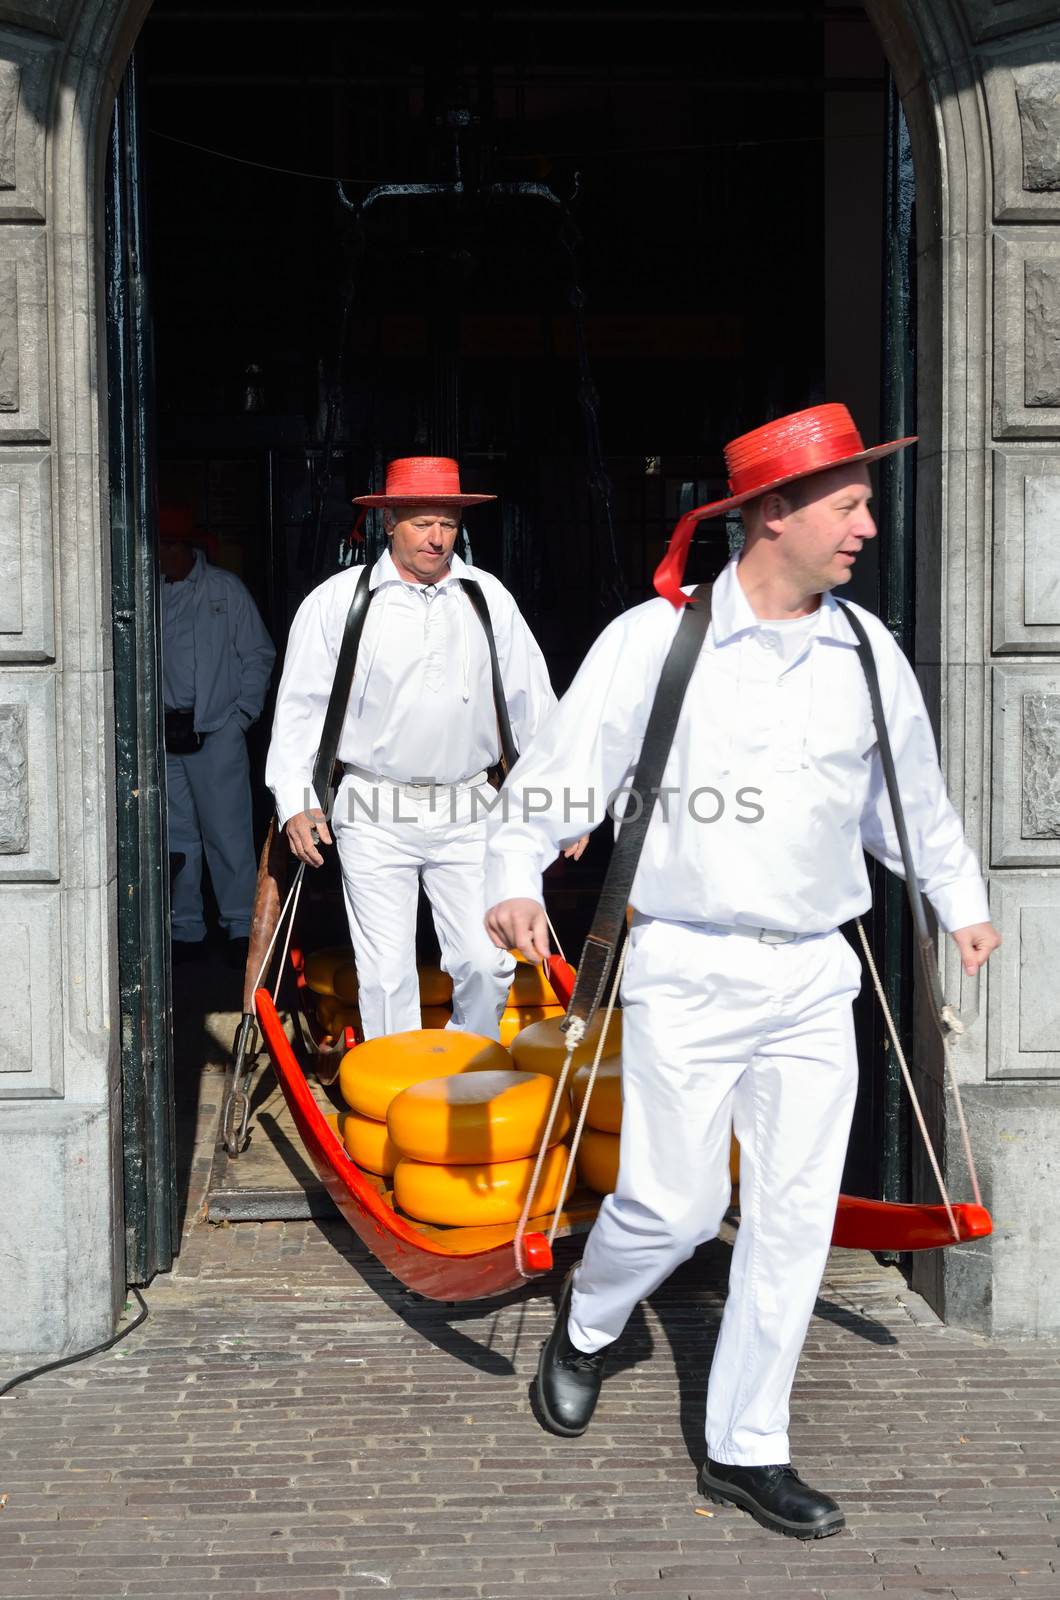 Men carrying cheese at the market by pljvv